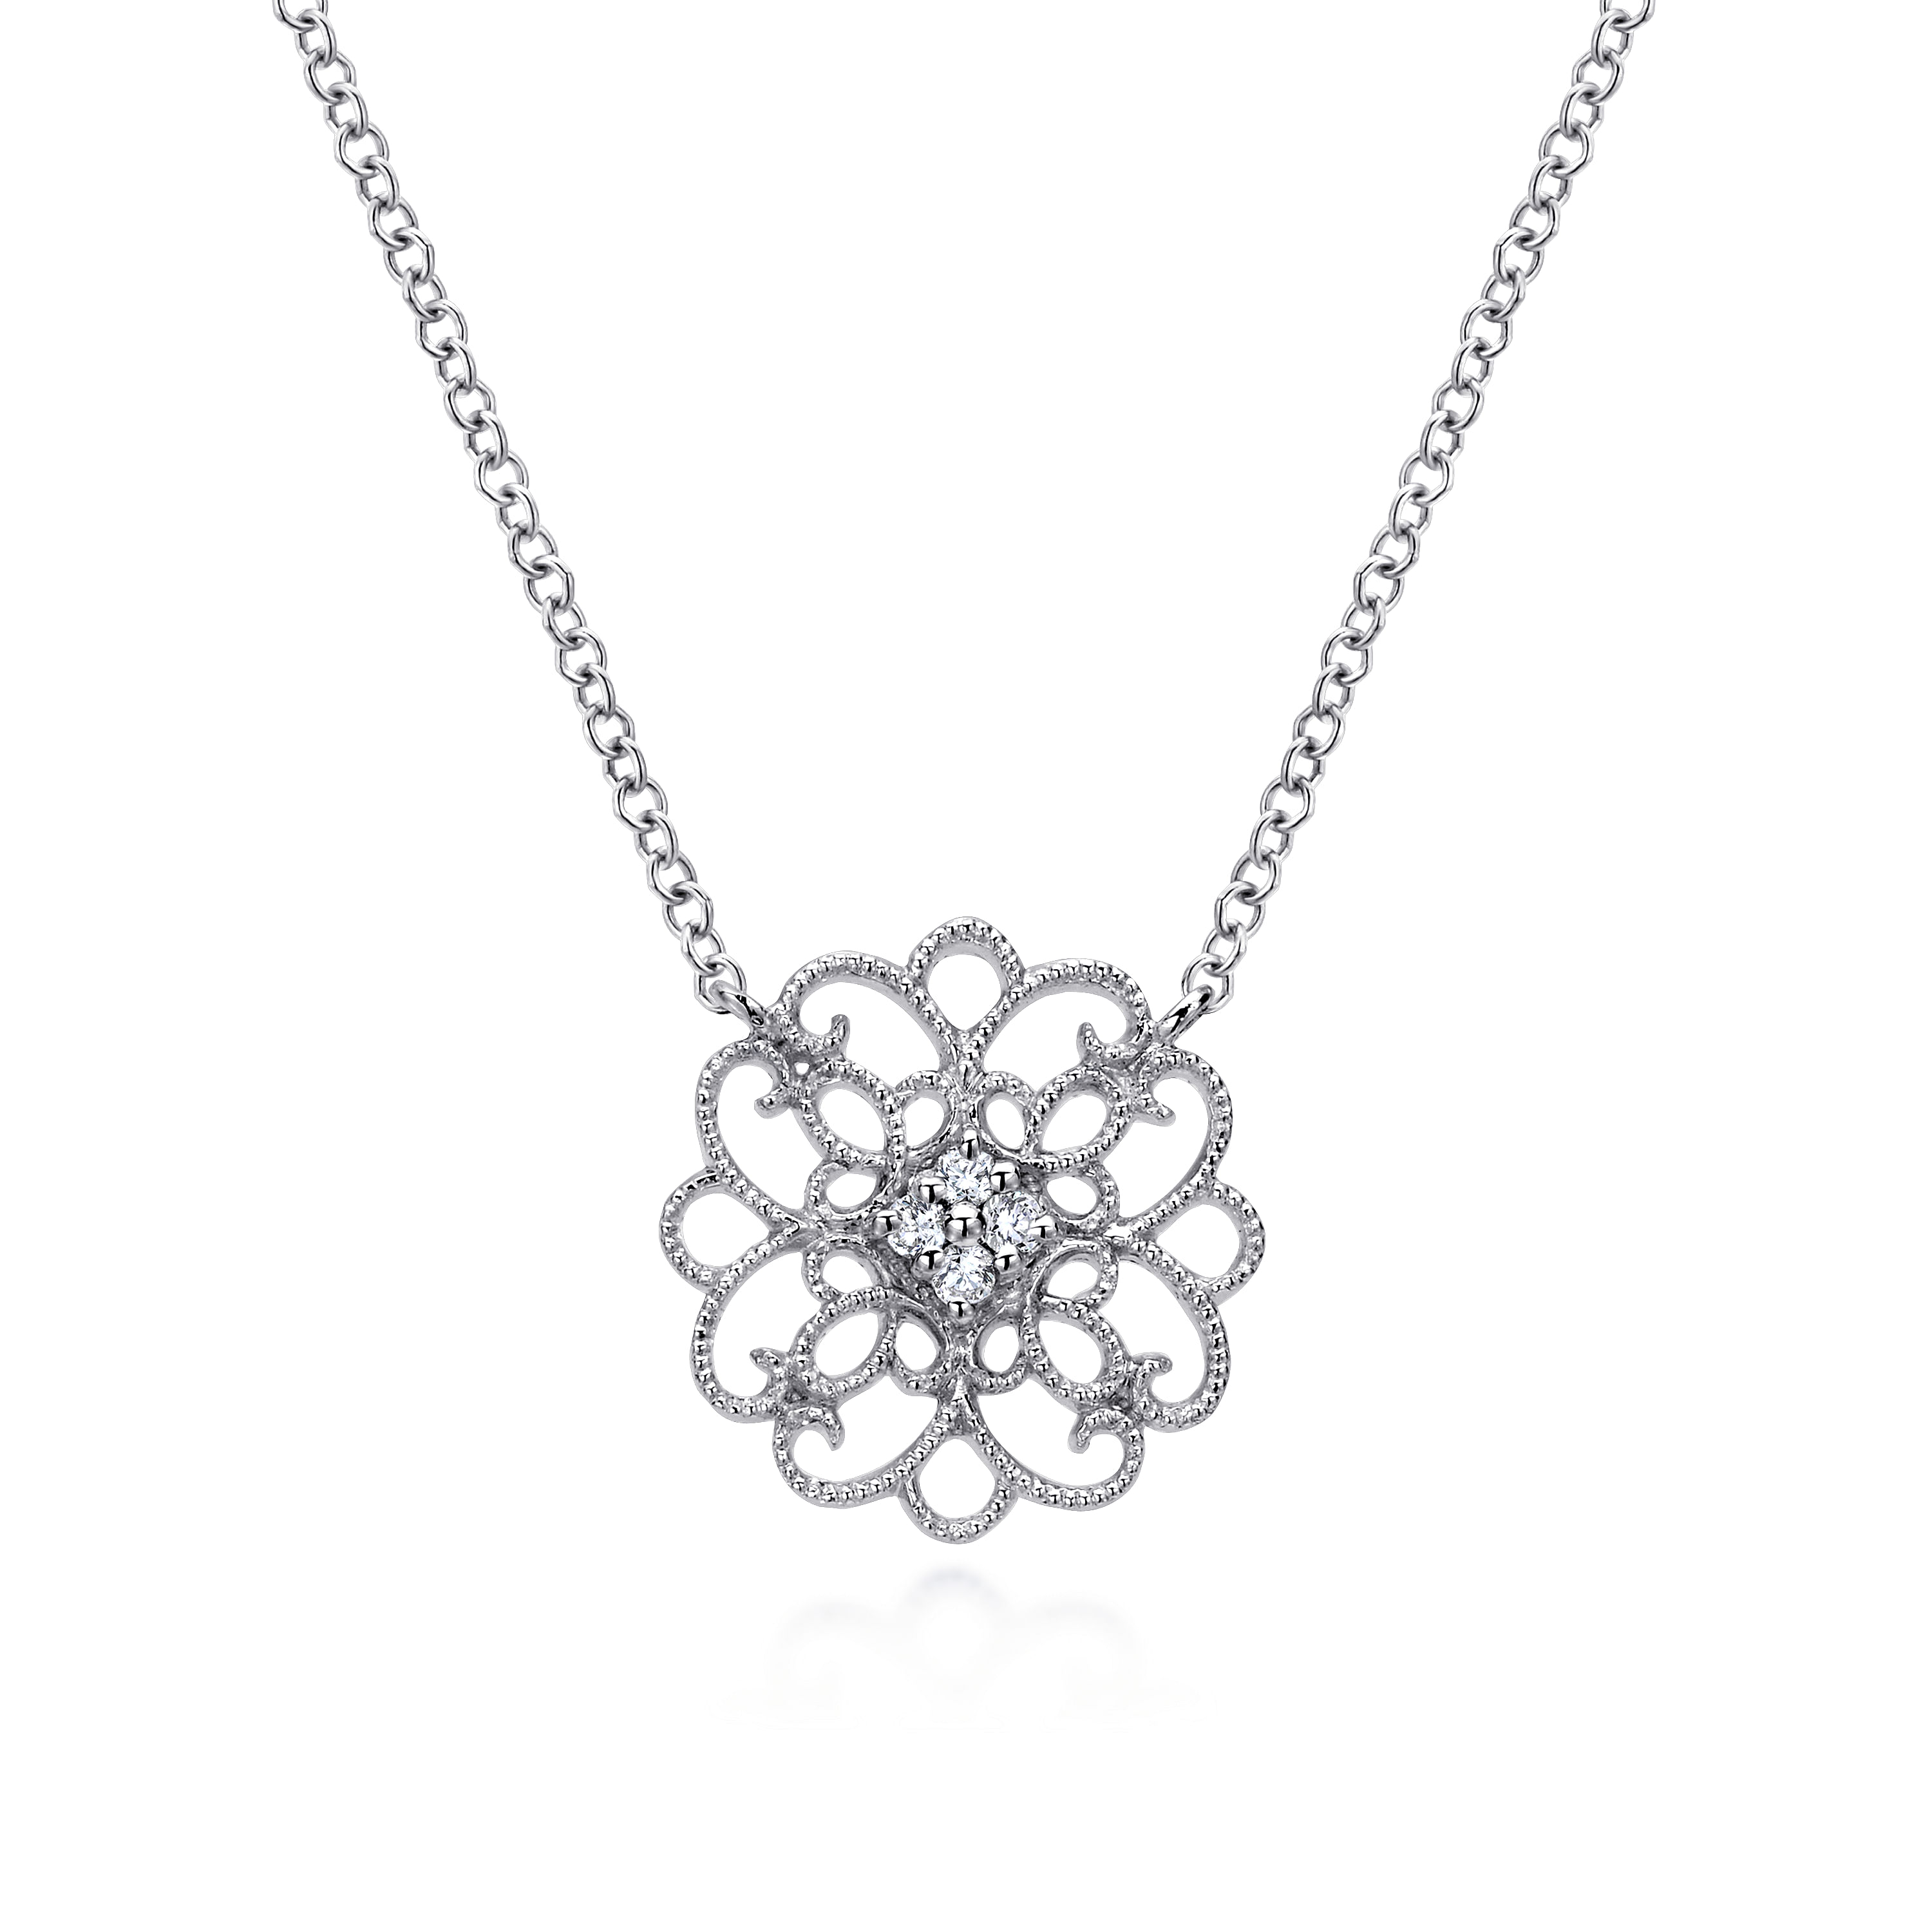 18 inch 925 Sterling Silver Round Filigree White Sapphire Pendant Necklace